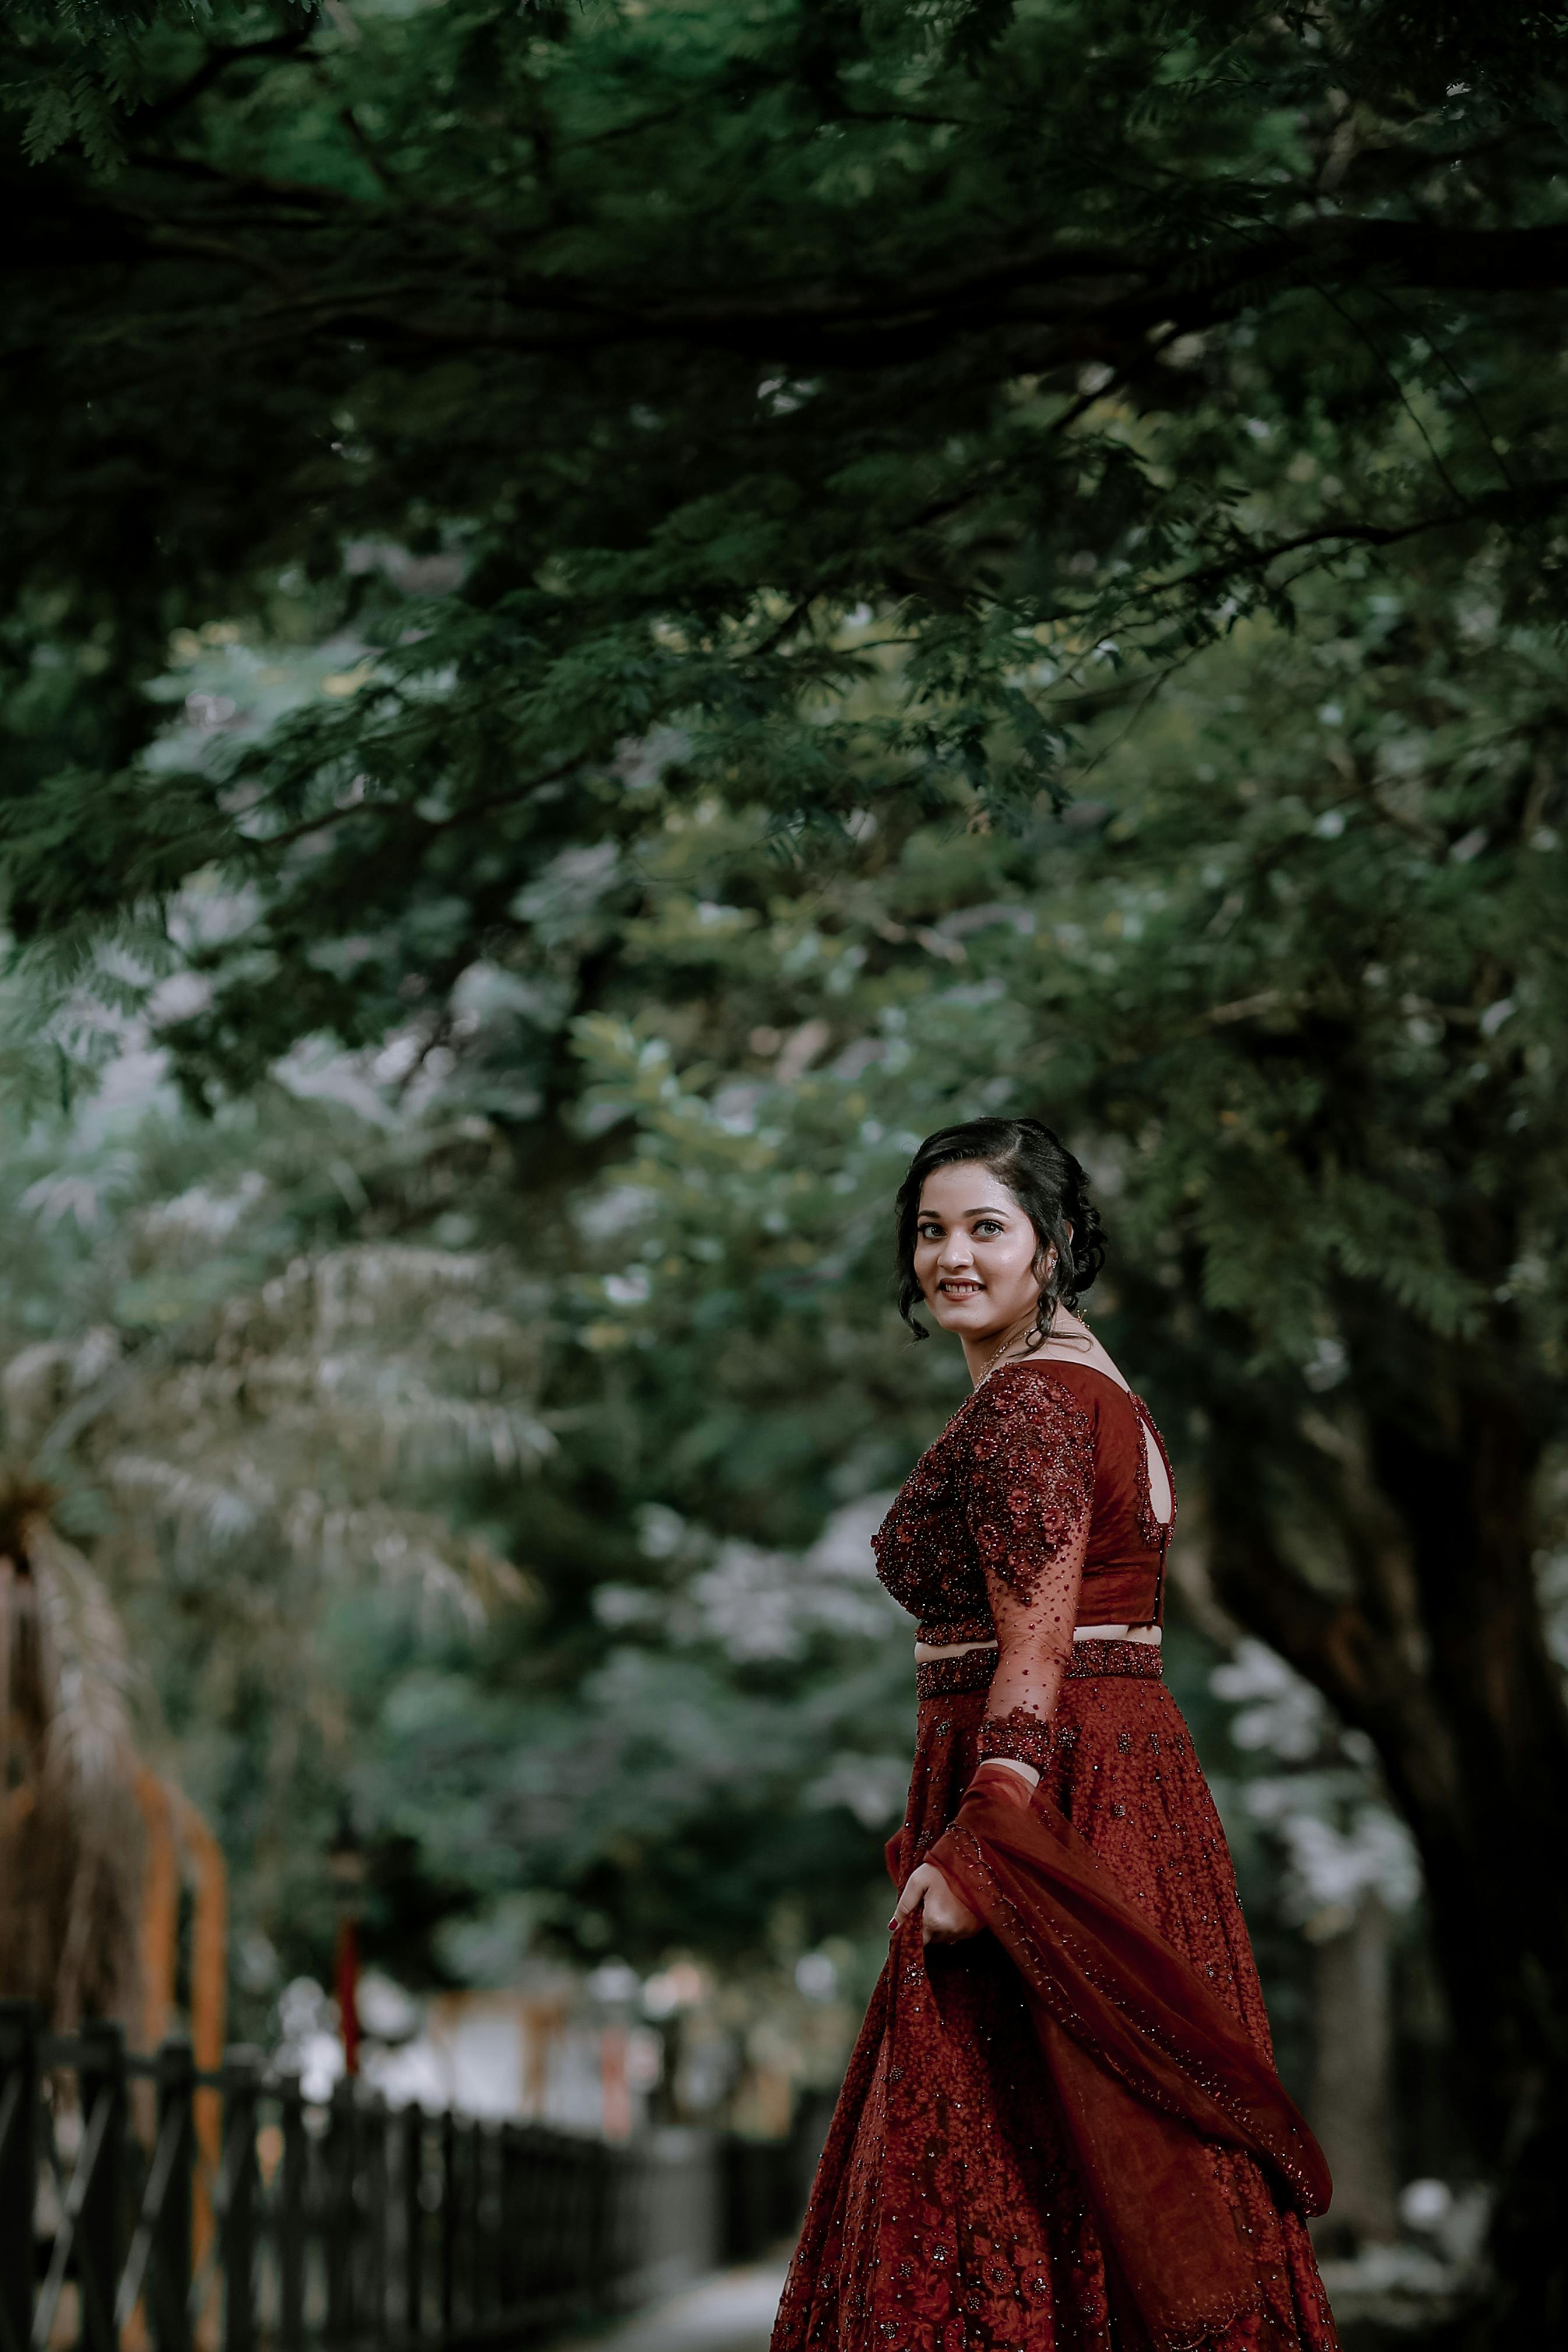 Premium Photo | Gorgeous young girl front pose wearing traditional dress  for photoshoot in garden